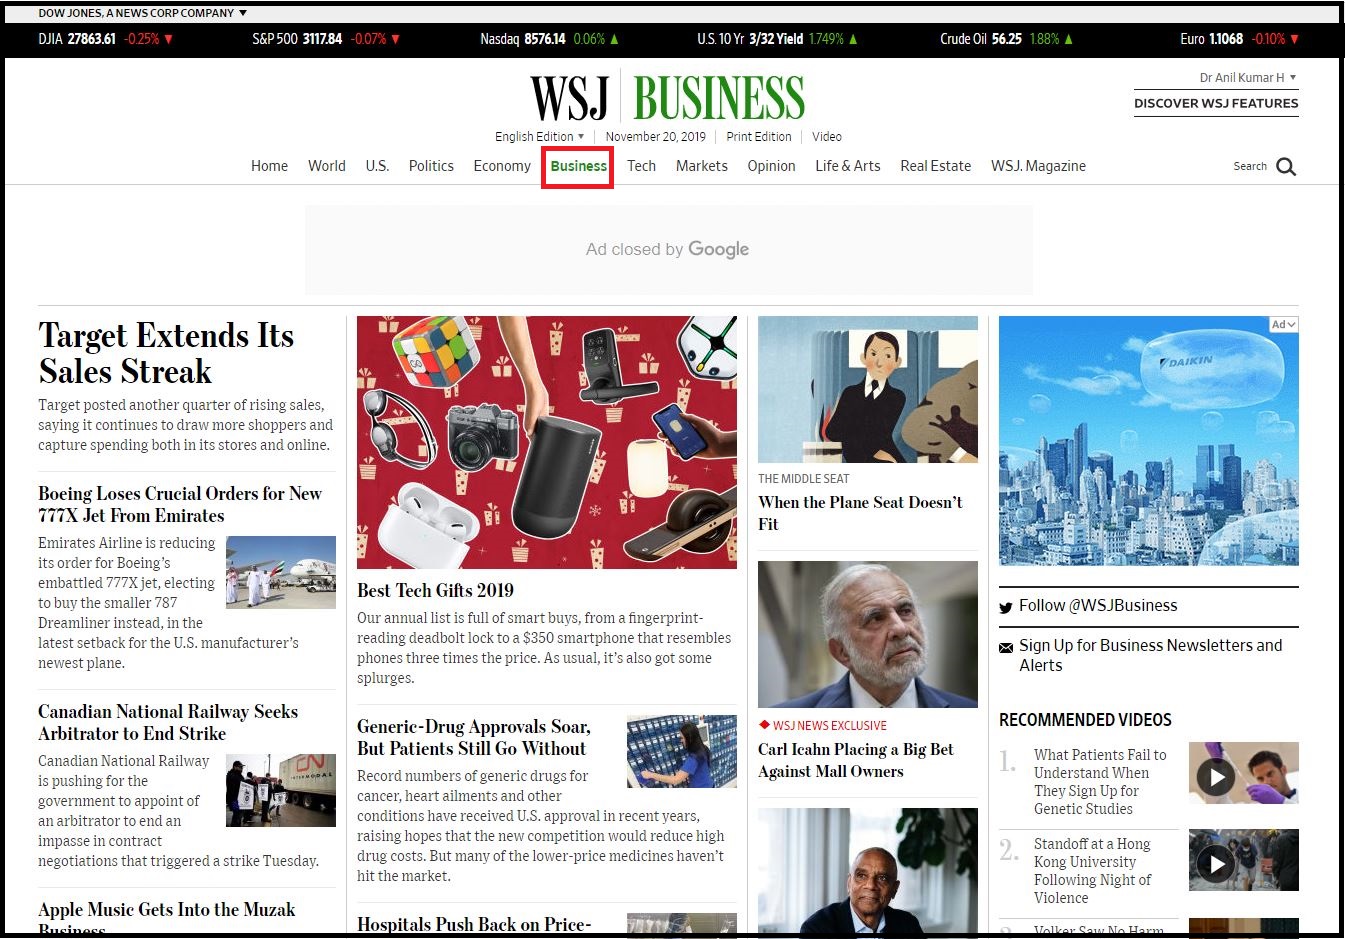 Open Wall Street Journal then Login with WSJ Credentials and Click on Business 